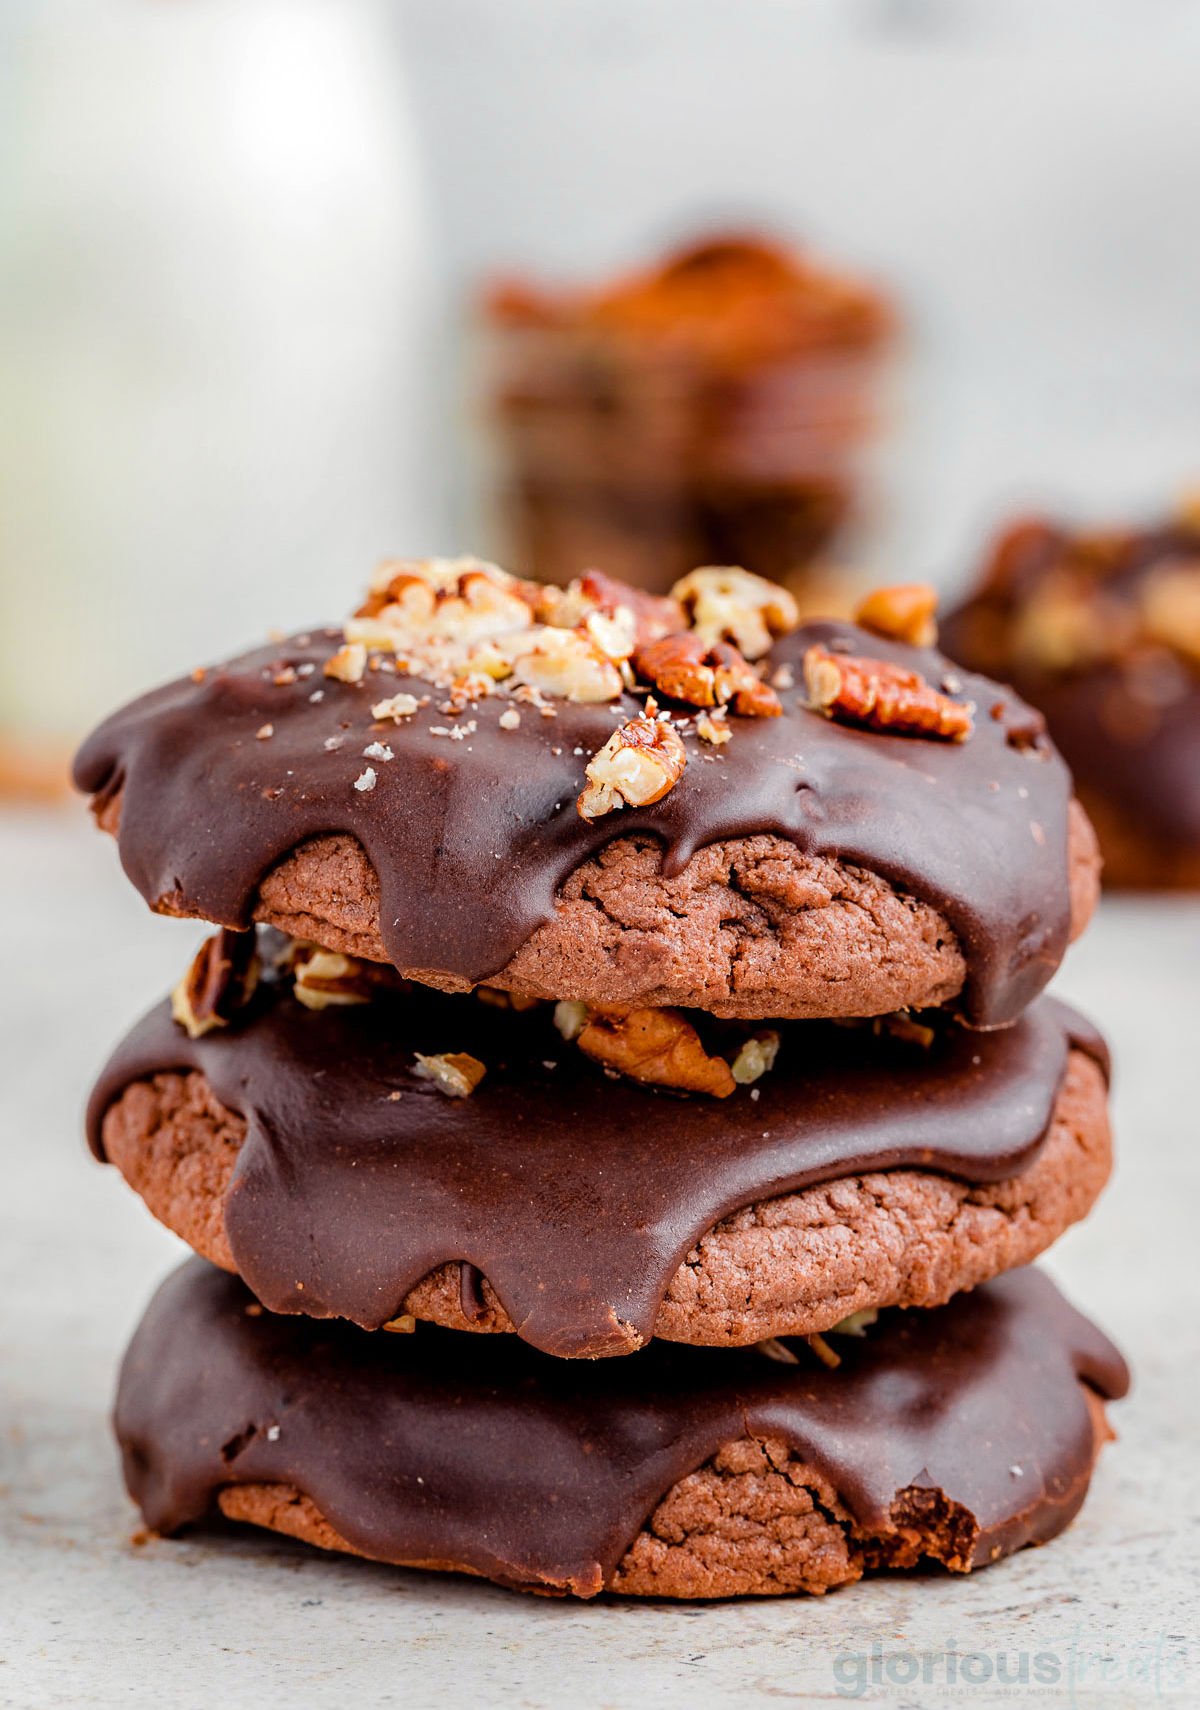 a stack of 3 chocolate cookies with chocolate drizzled on top and nuts sprinkled